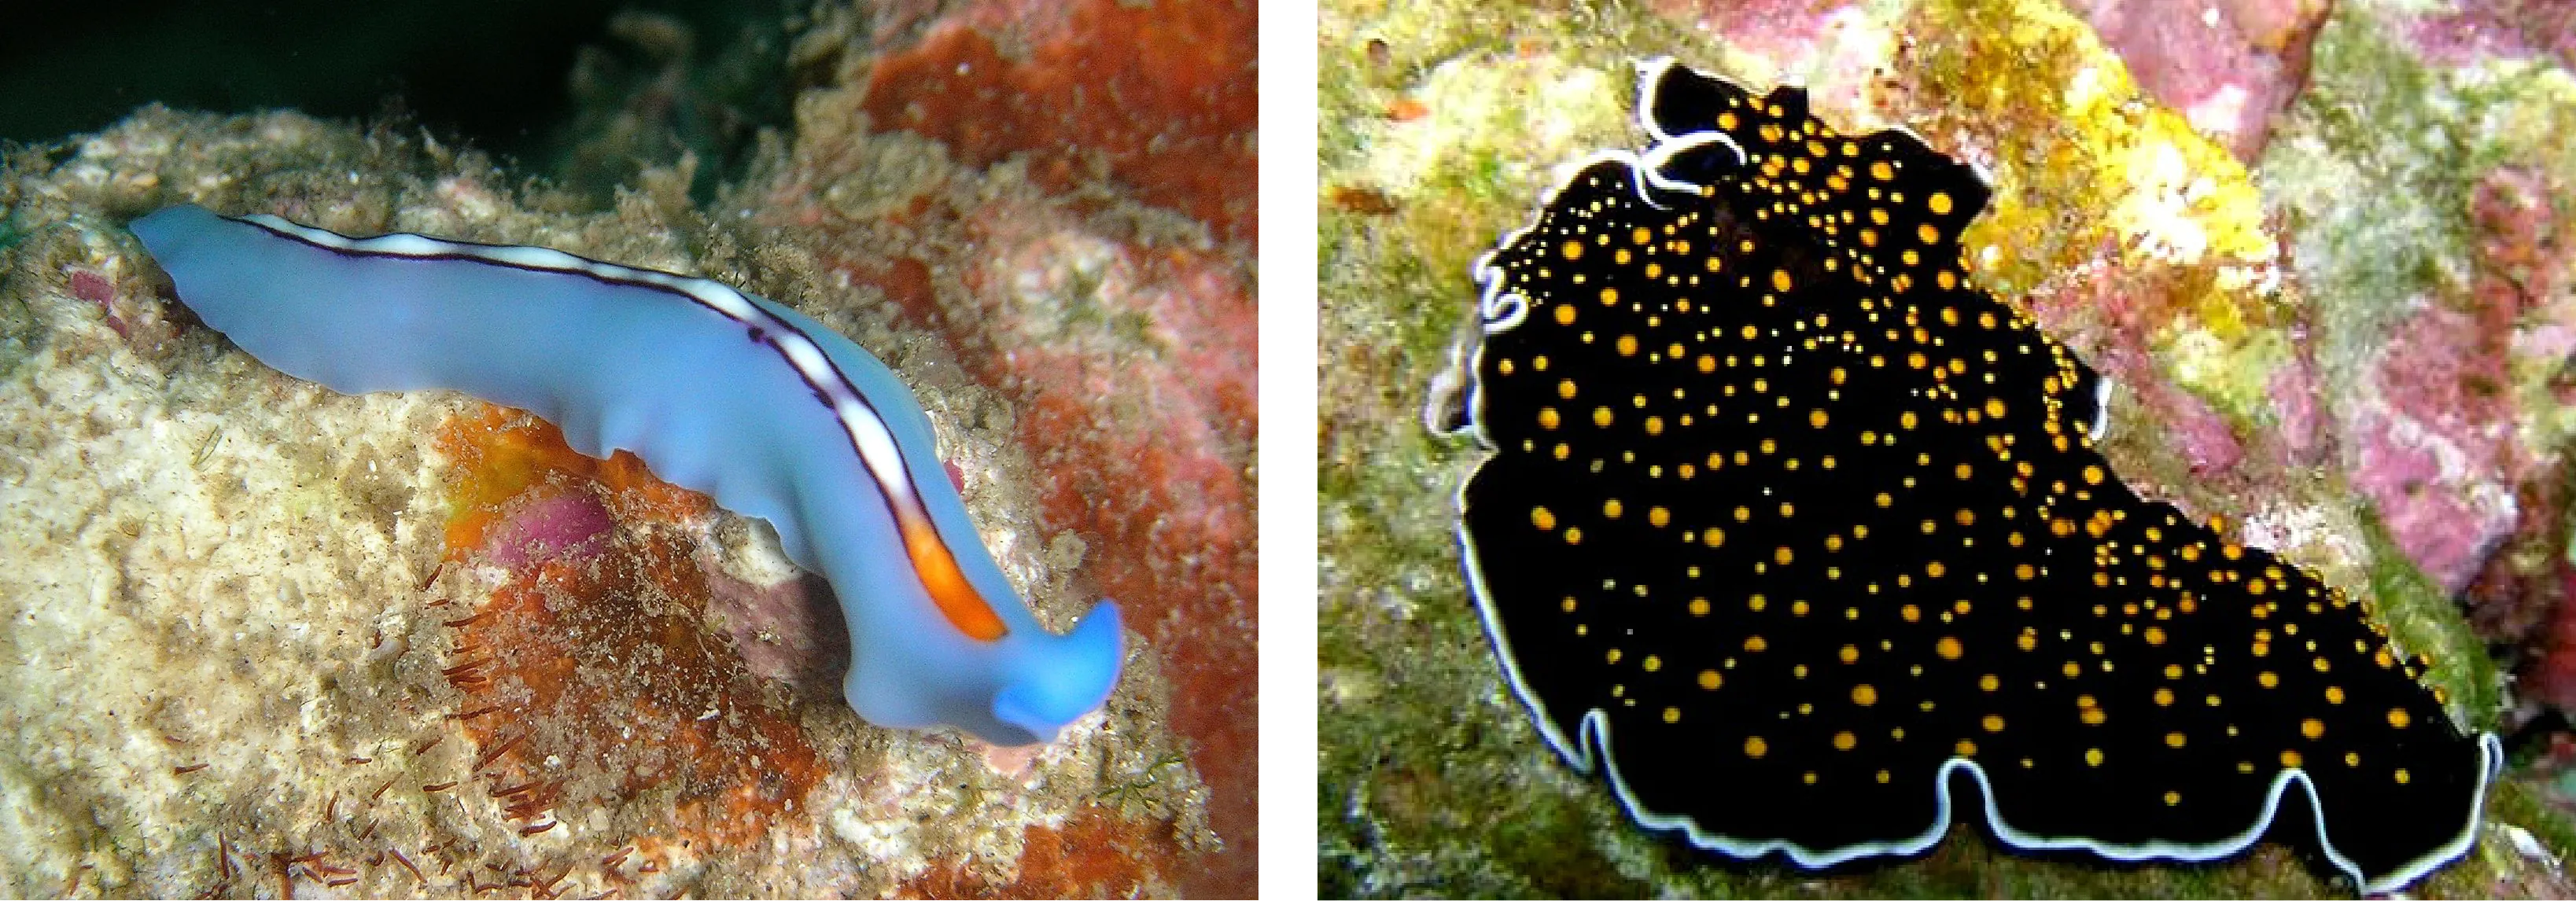 This image shows two flatworms with significant physical diversity.  One flatworm is brightly colored, and is long and tubular.  The other flatworm is broad, and flat, and a dark color.